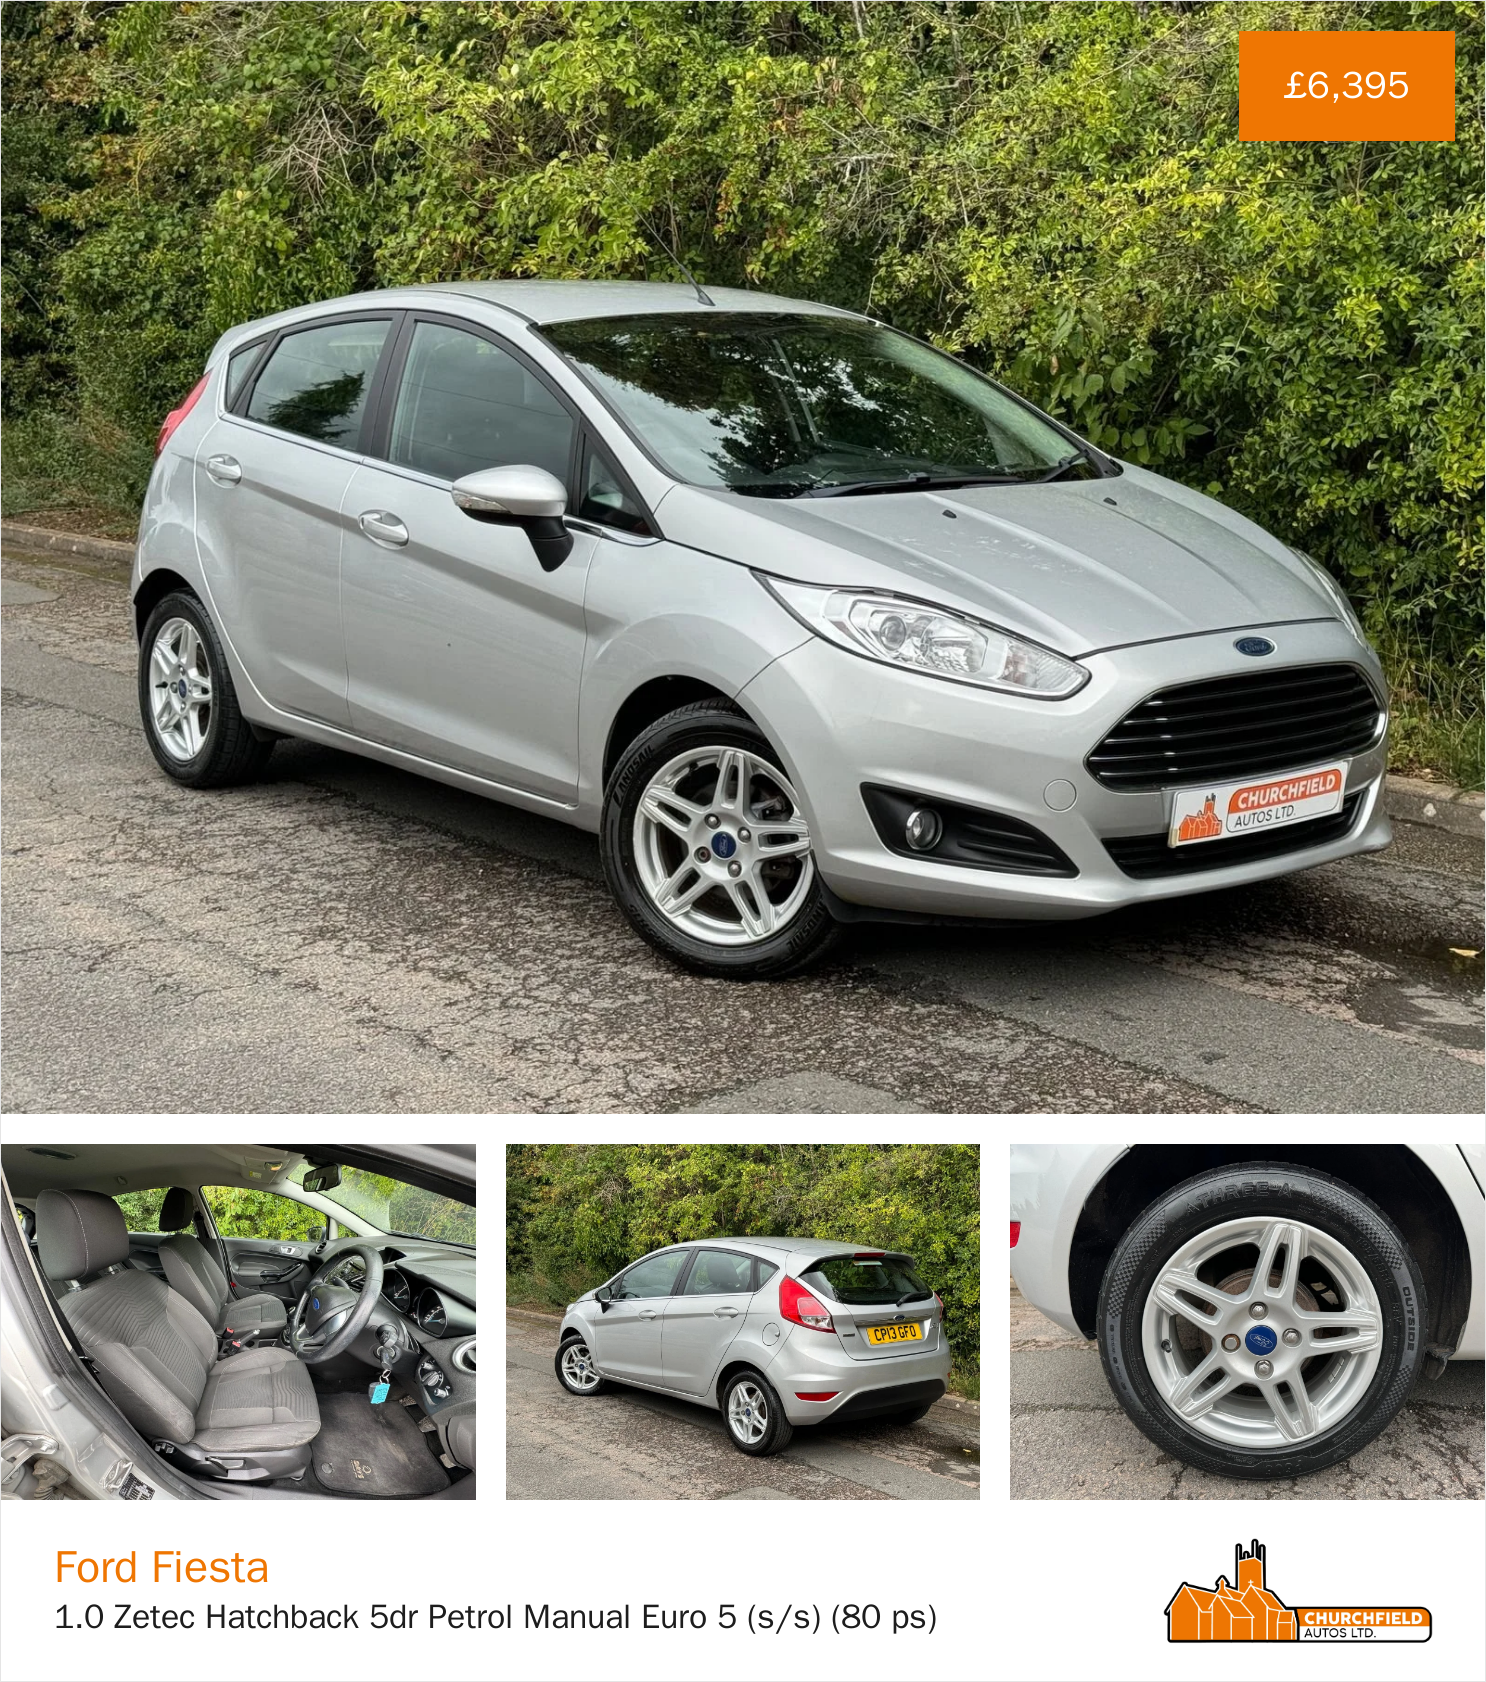 2010 Ford Fiesta Zetec S Review